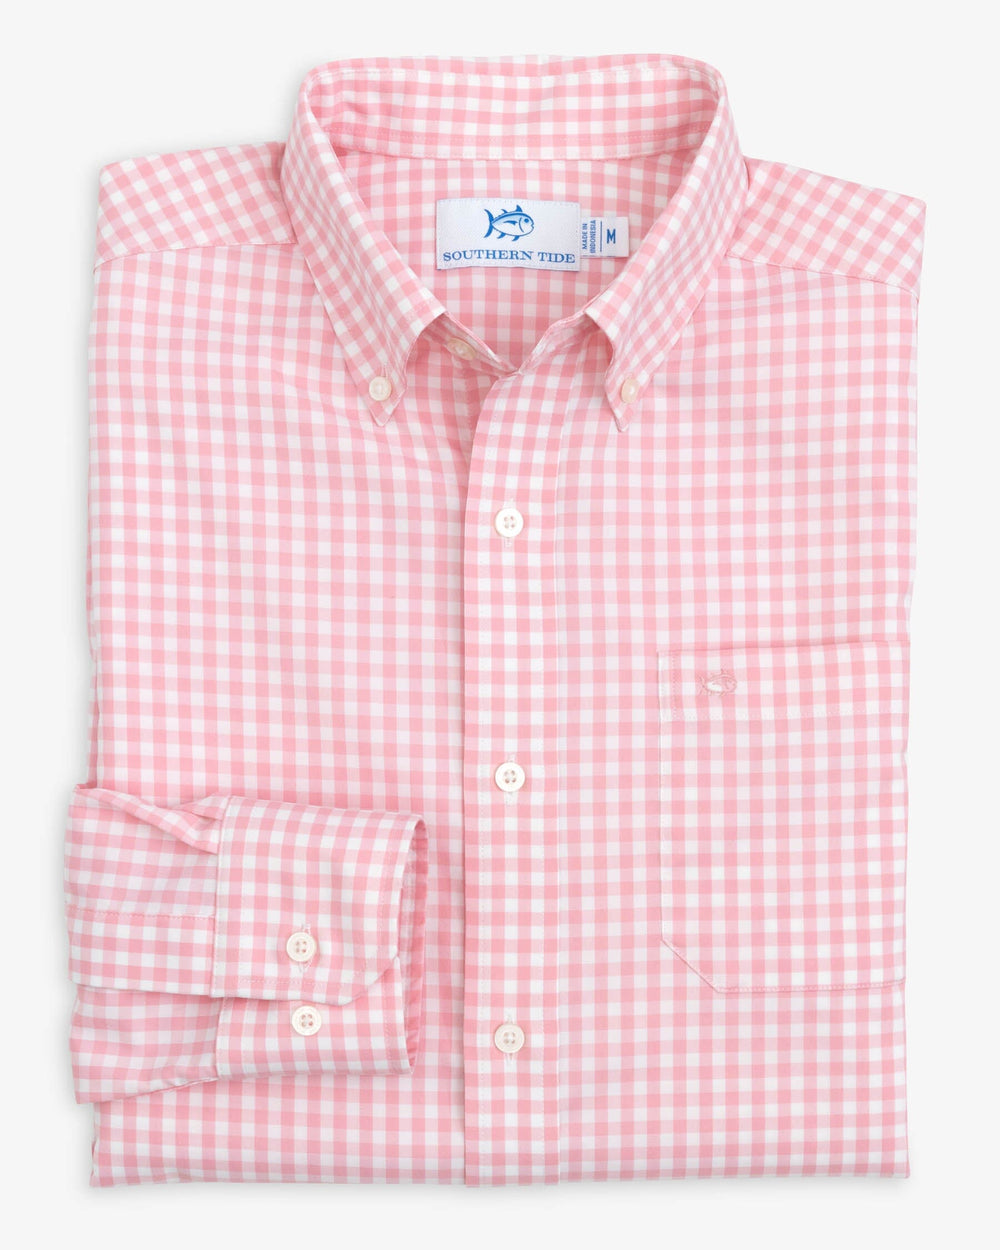 The folded view of the Southern Tide Heather Hartwell Plaid Intercoastal Sport Shirt by Southern Tide - Heather Flamingo Pink